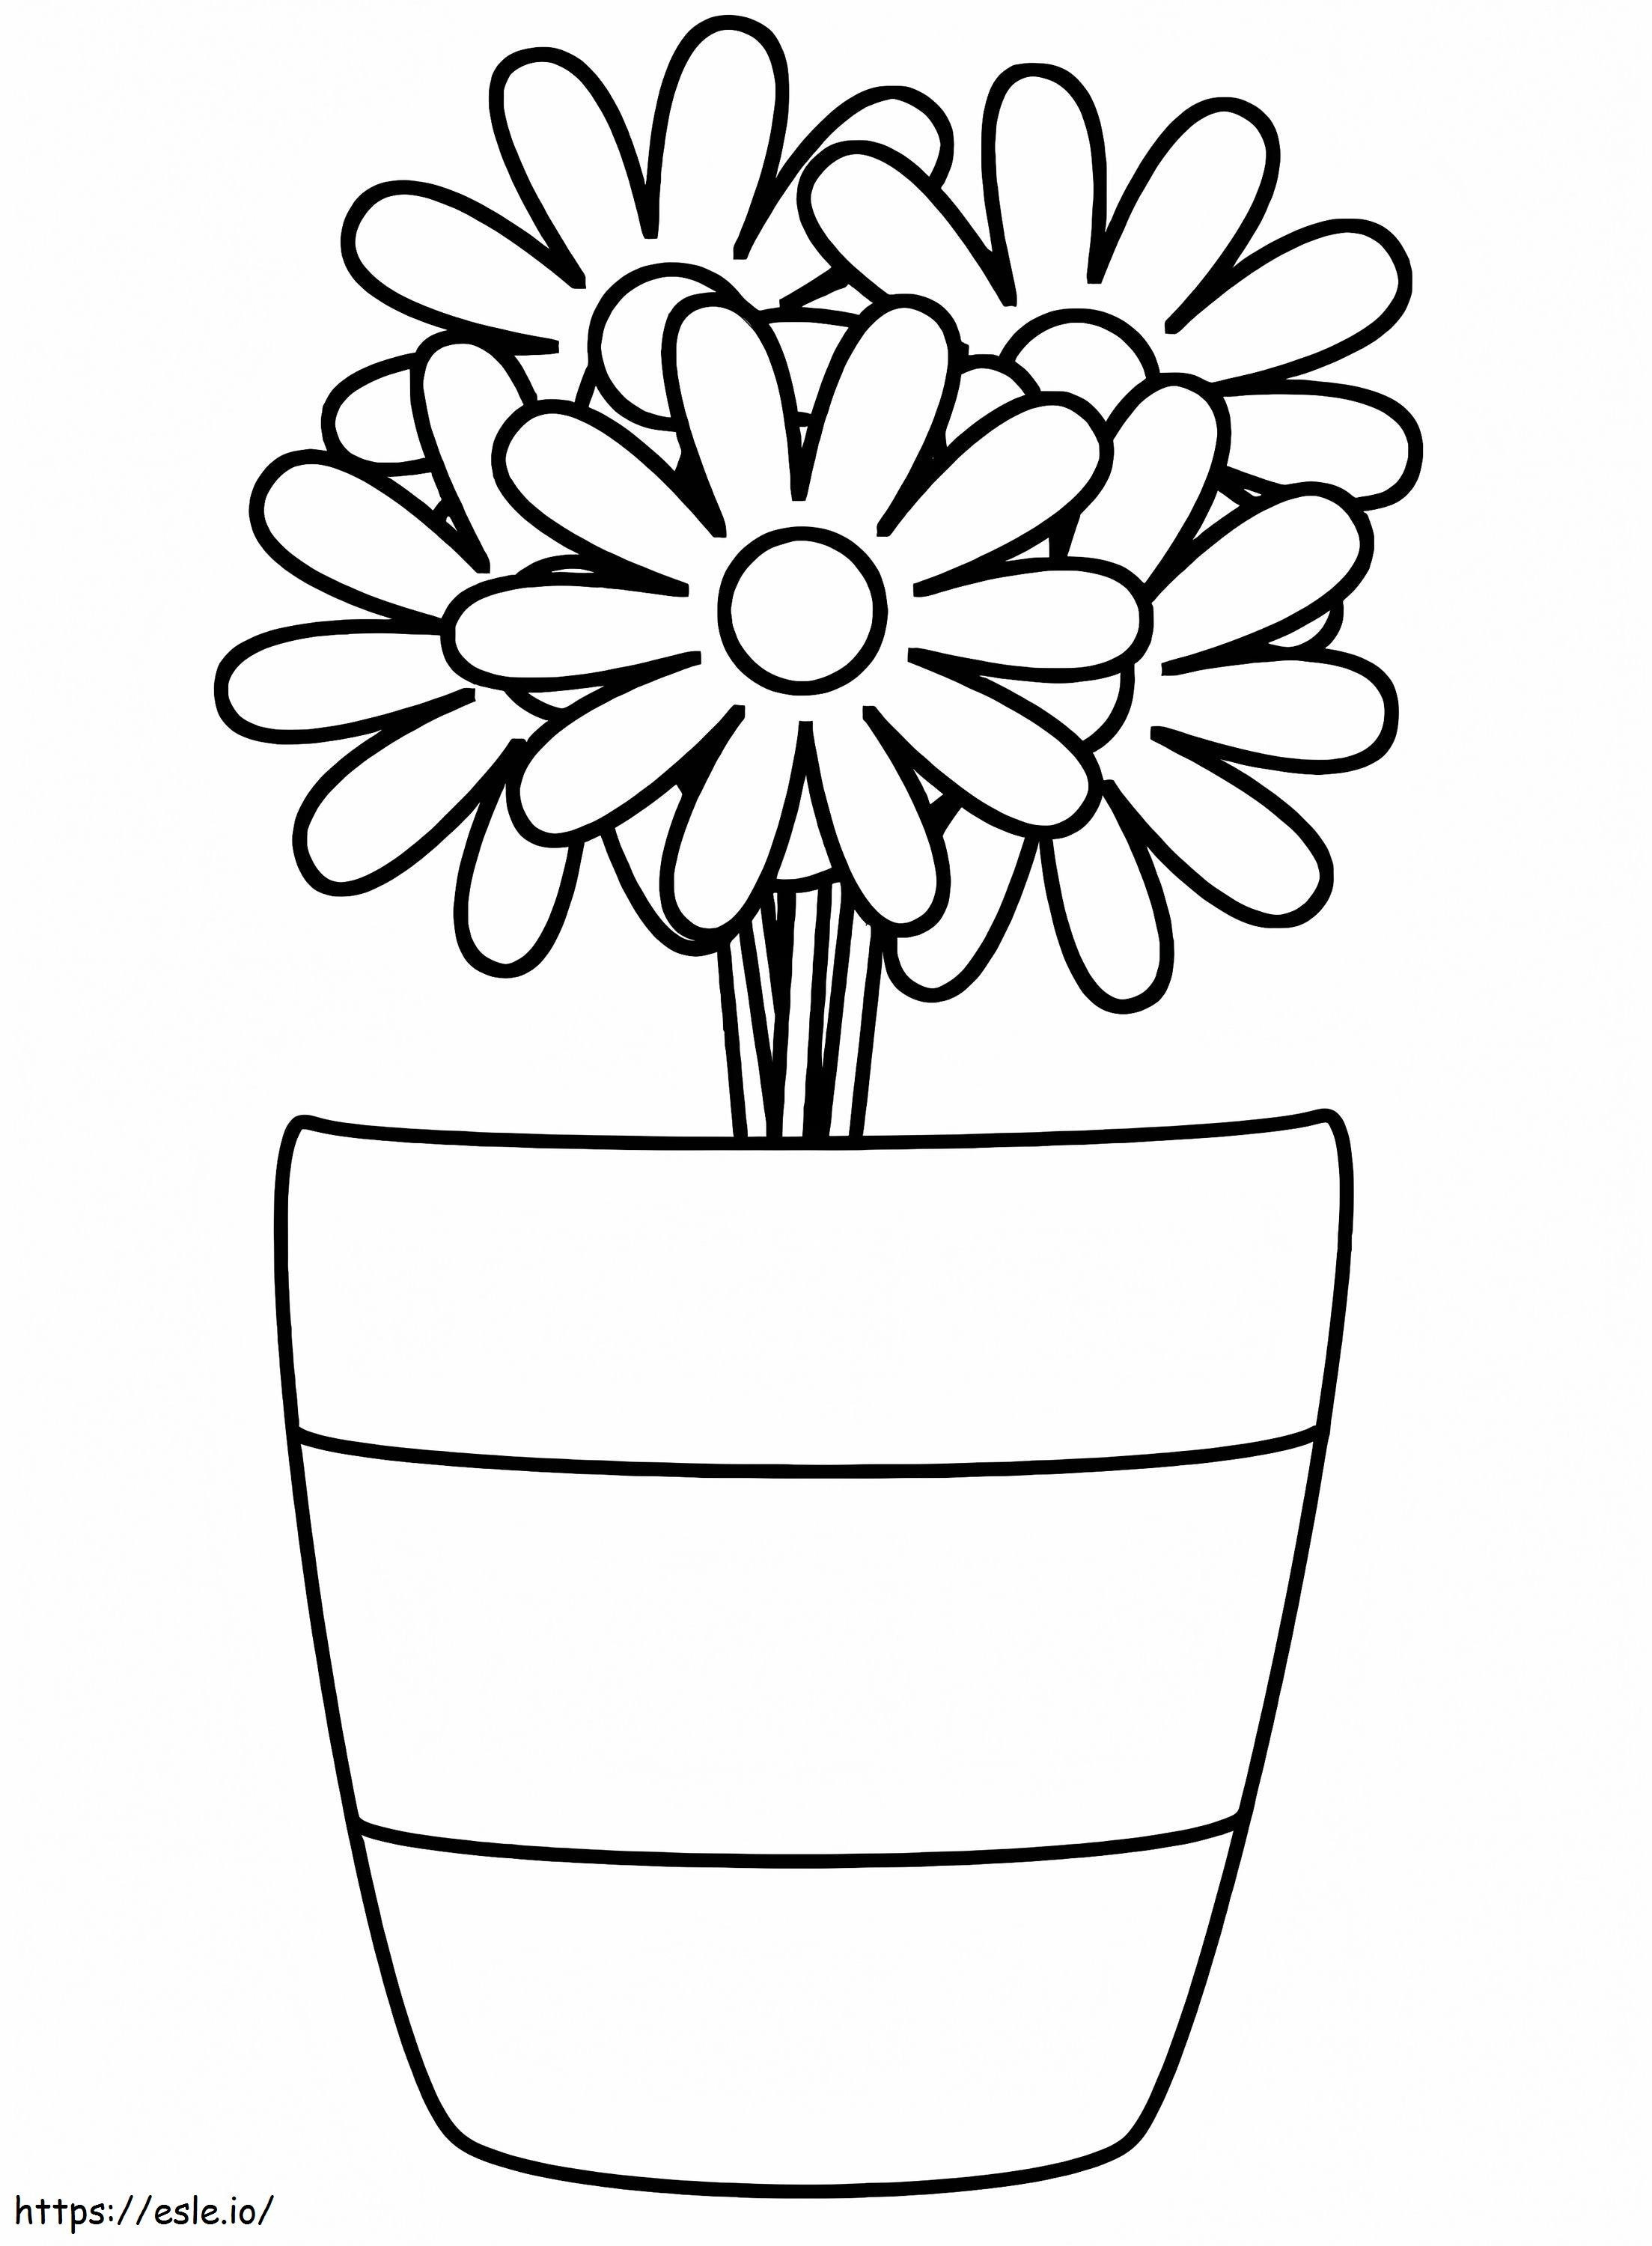 Flower Vase coloring page